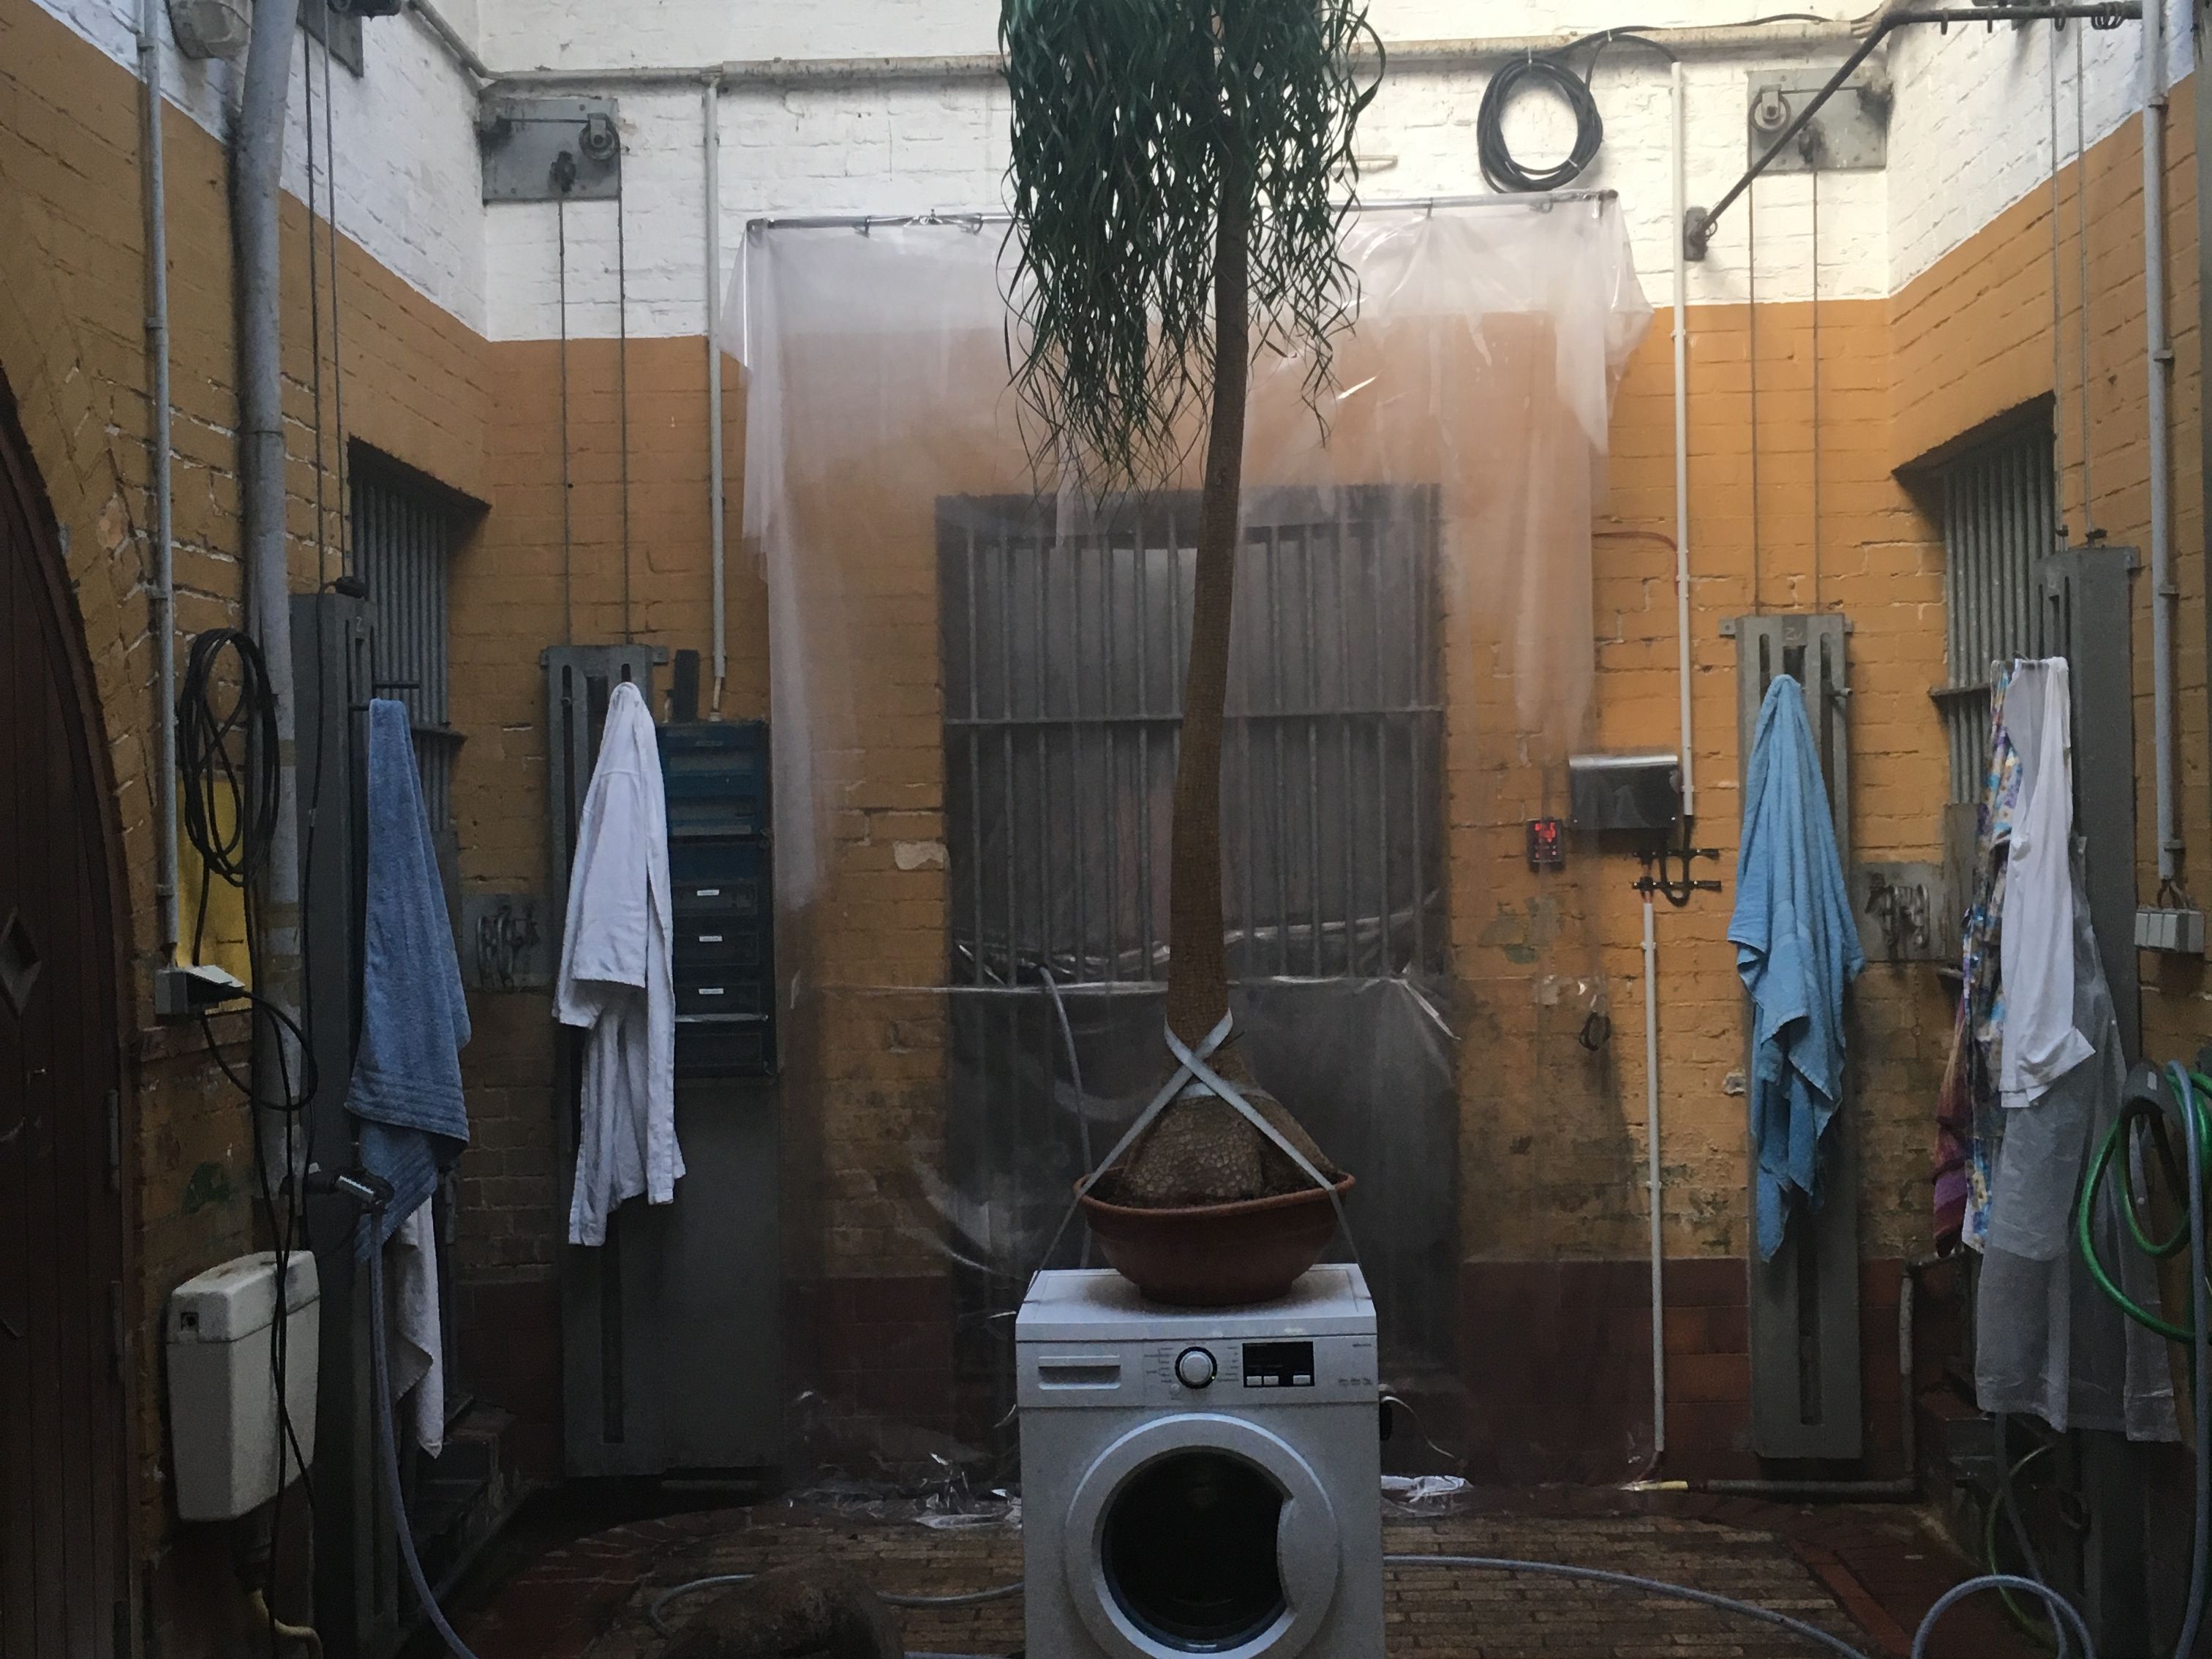 Installation view of central room of bear cage with herbal infusion washing machine and participant towels in PPKK 03.00 sauna by Sarah Ancelle Schoenfeld and Louis-Philippe Scoufaras at Baerenzwinger Berlin